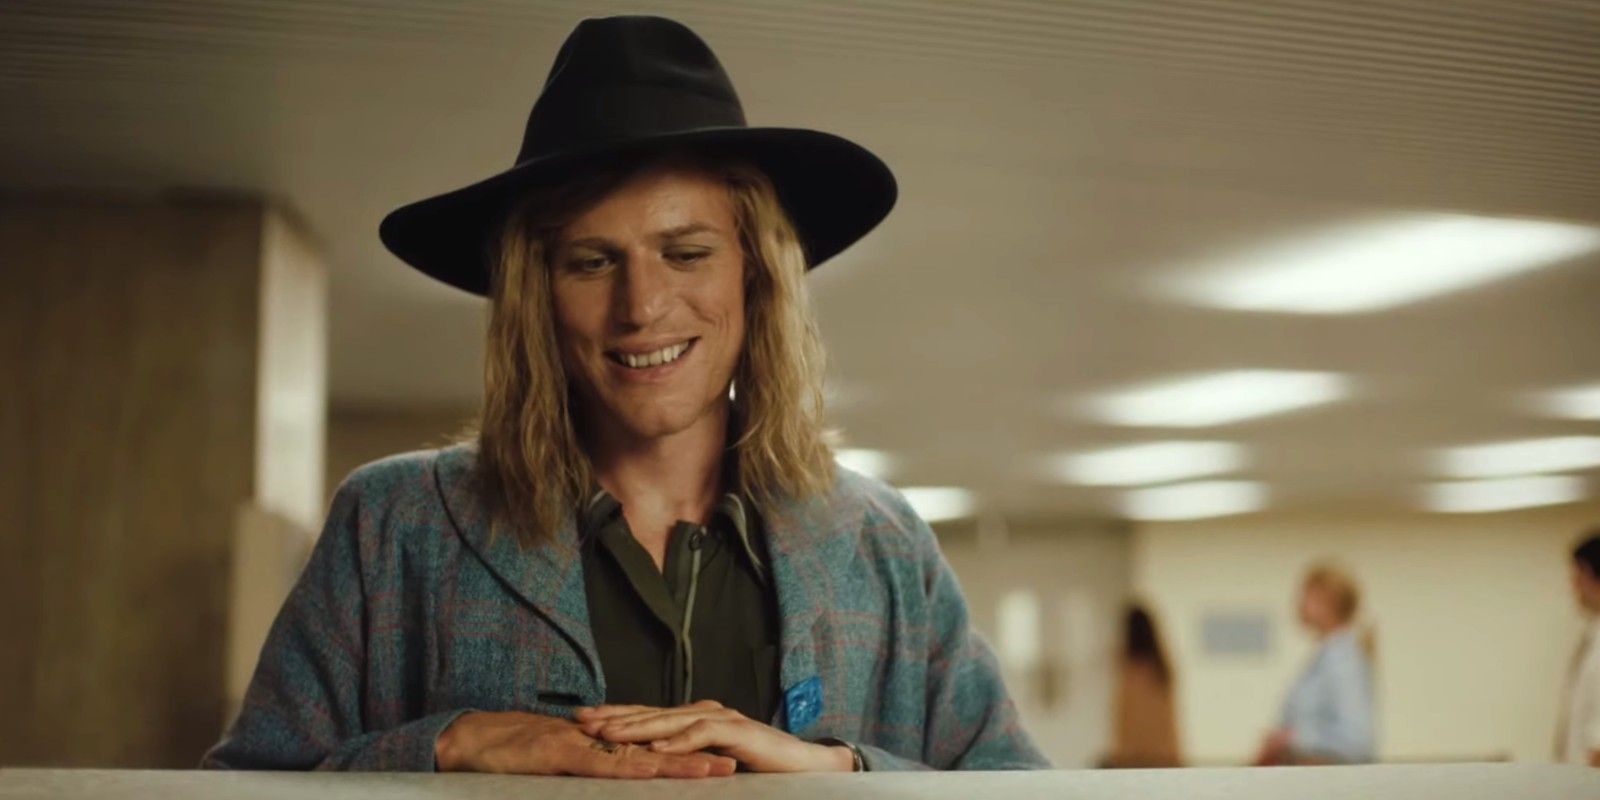 Johnny Flynn smiling as David Bowie in Stardust